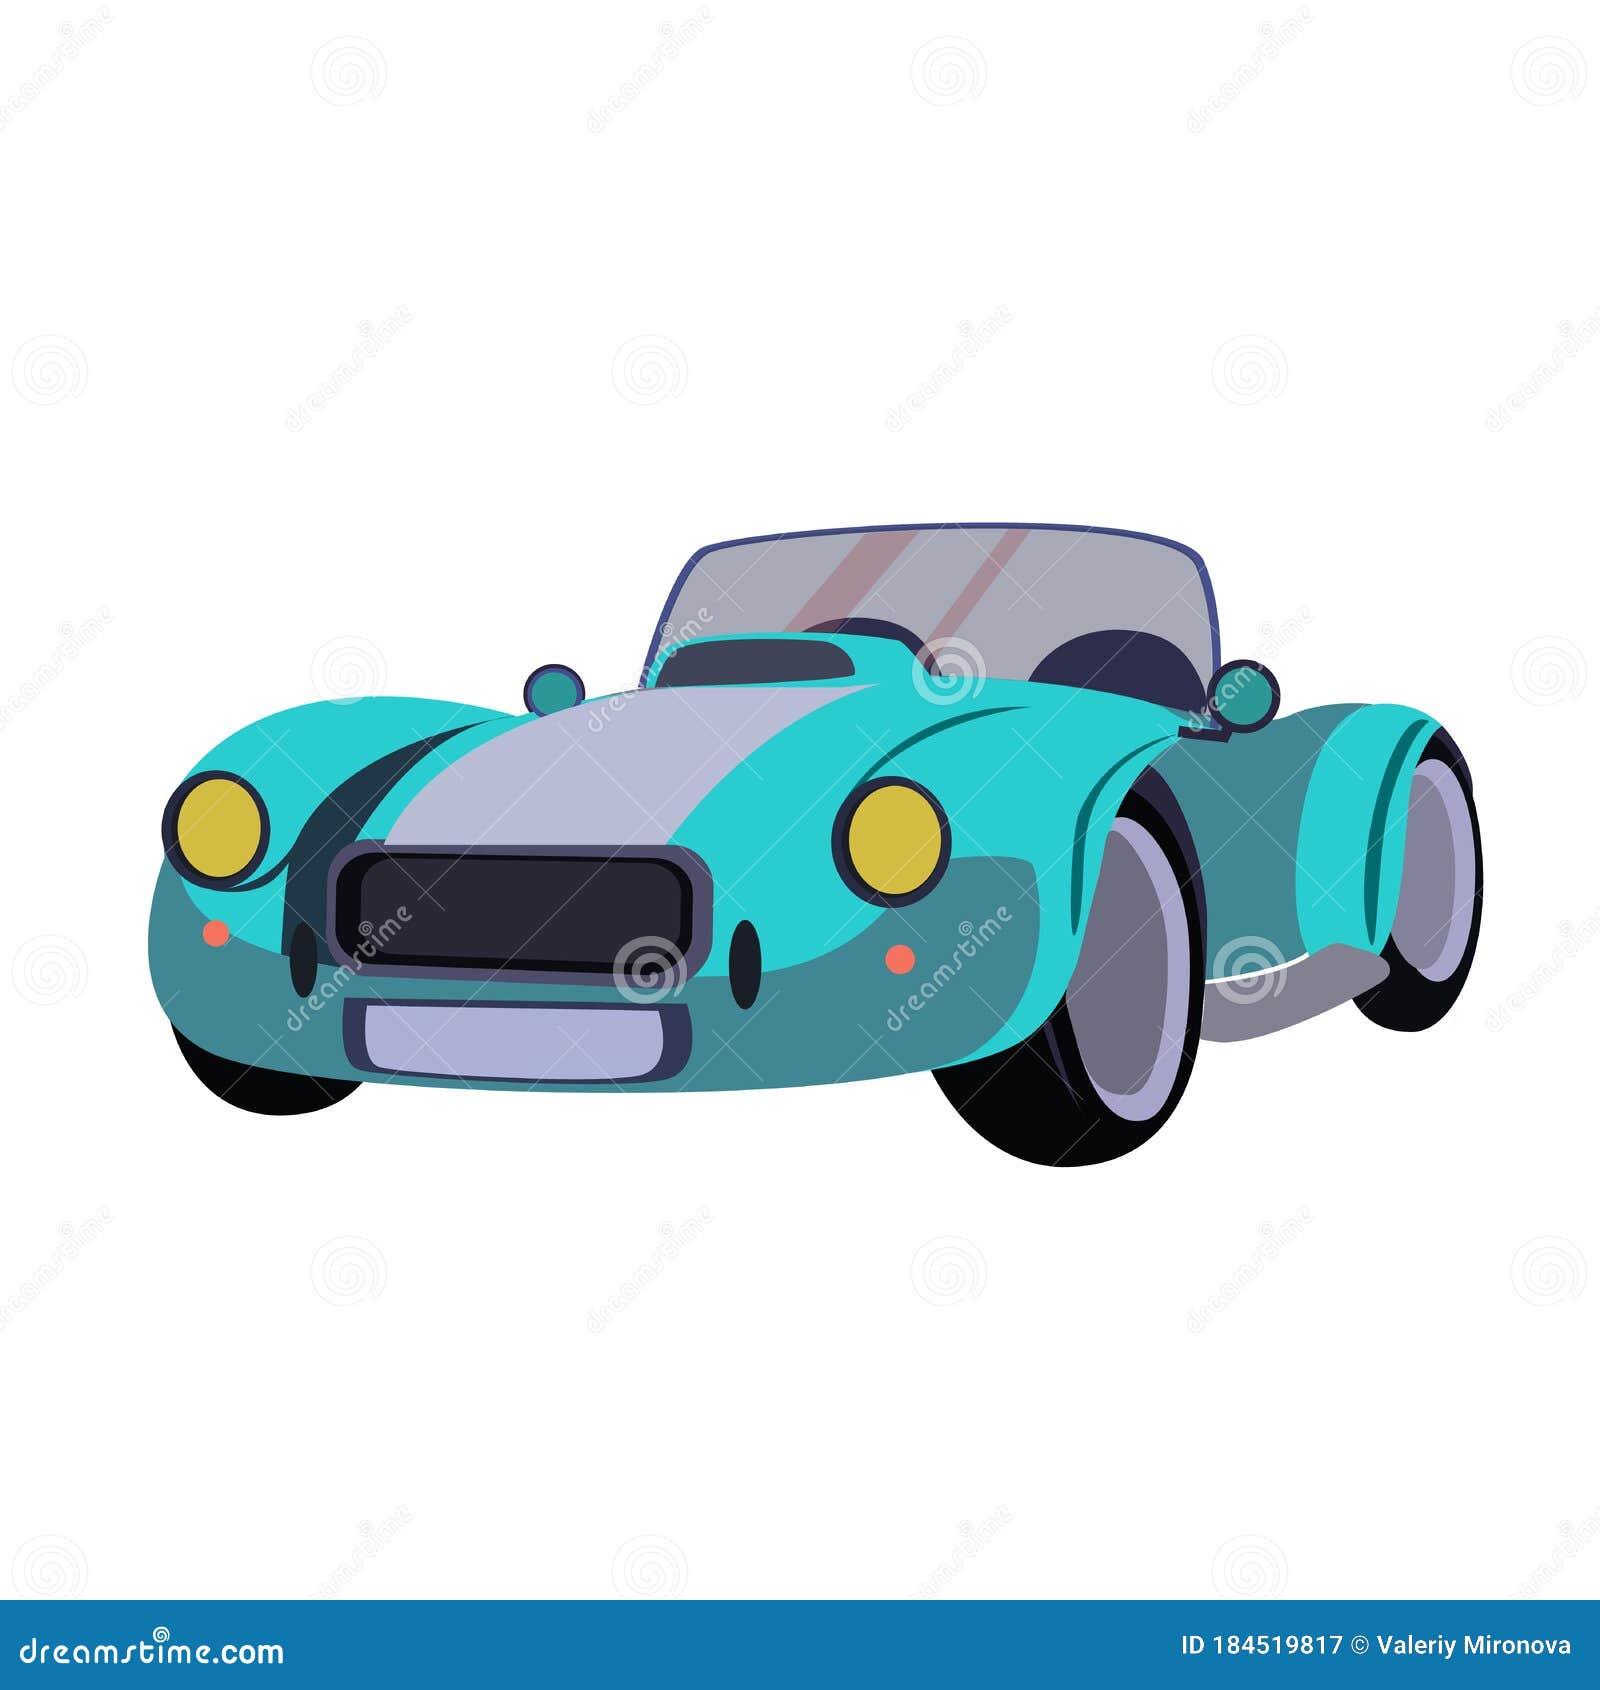  stock car . passenger car made in cartoon style. image of baby car